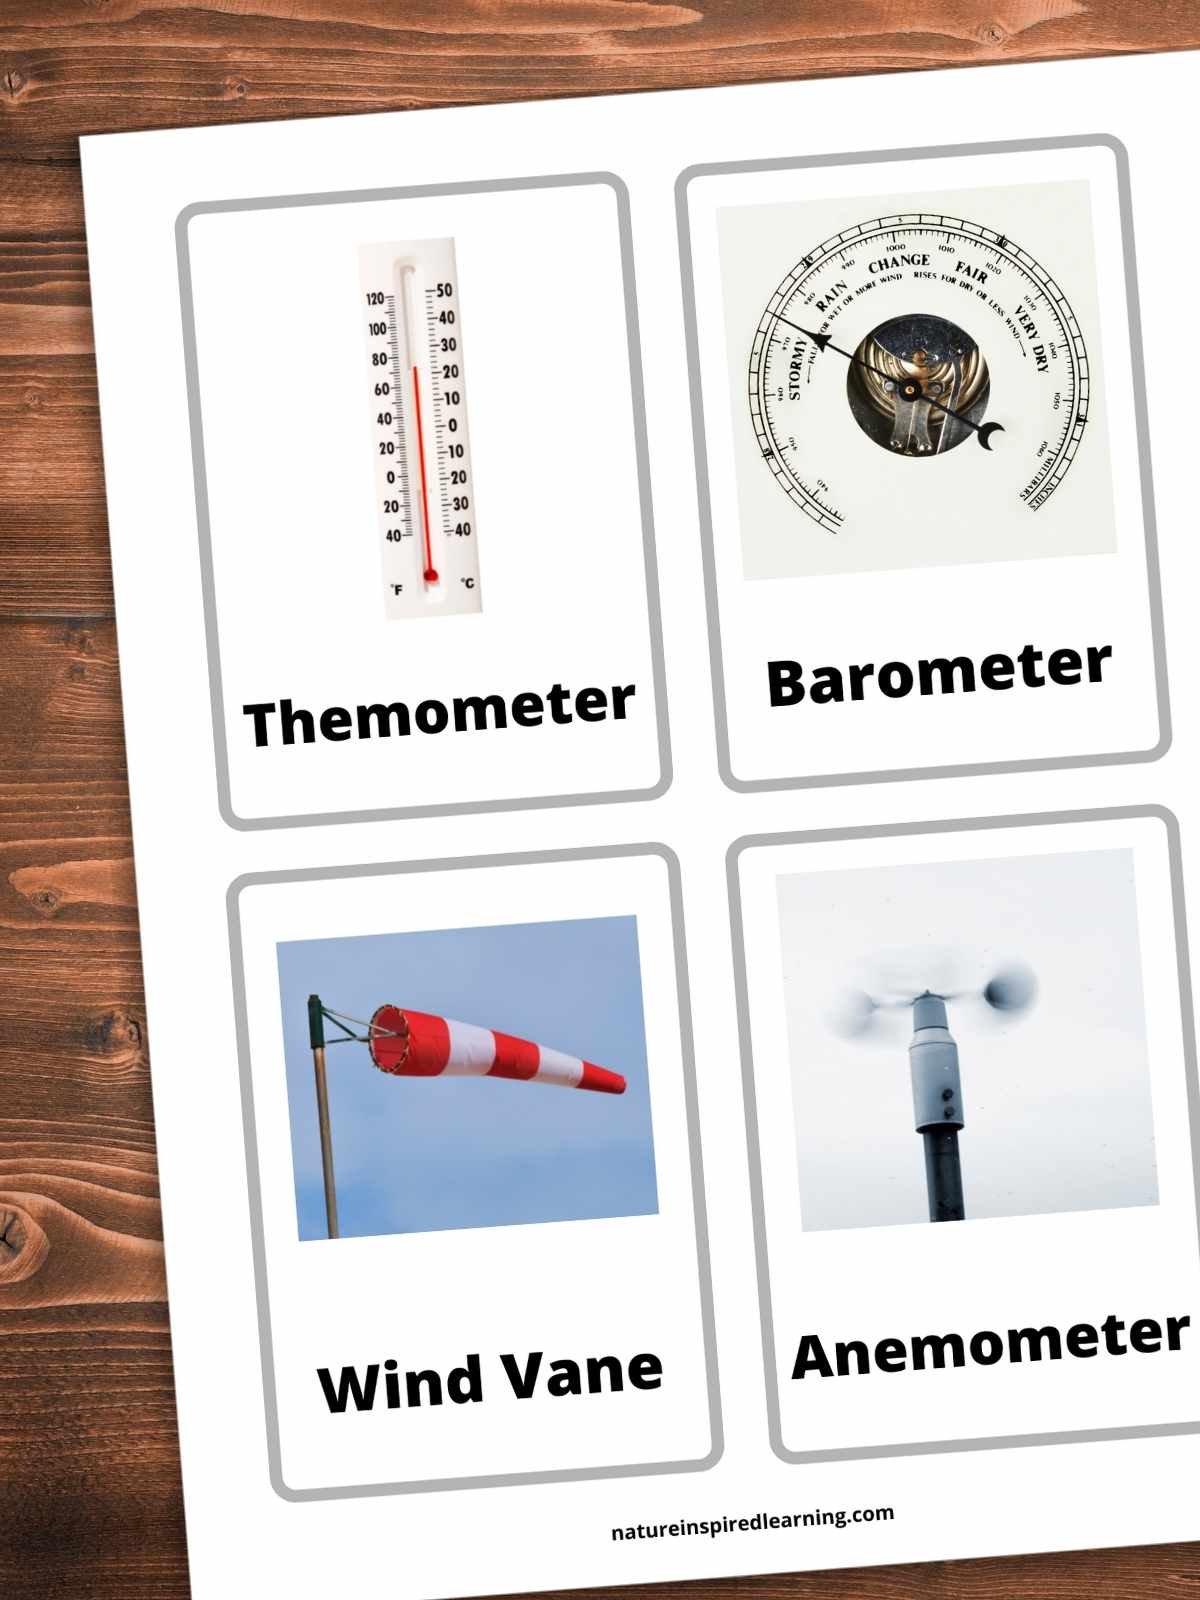 printable weather flashcards with weather tools including thermometer, barometer, wind vane, and anemometer vocab word written on each card below an image. Printable on a wooden background